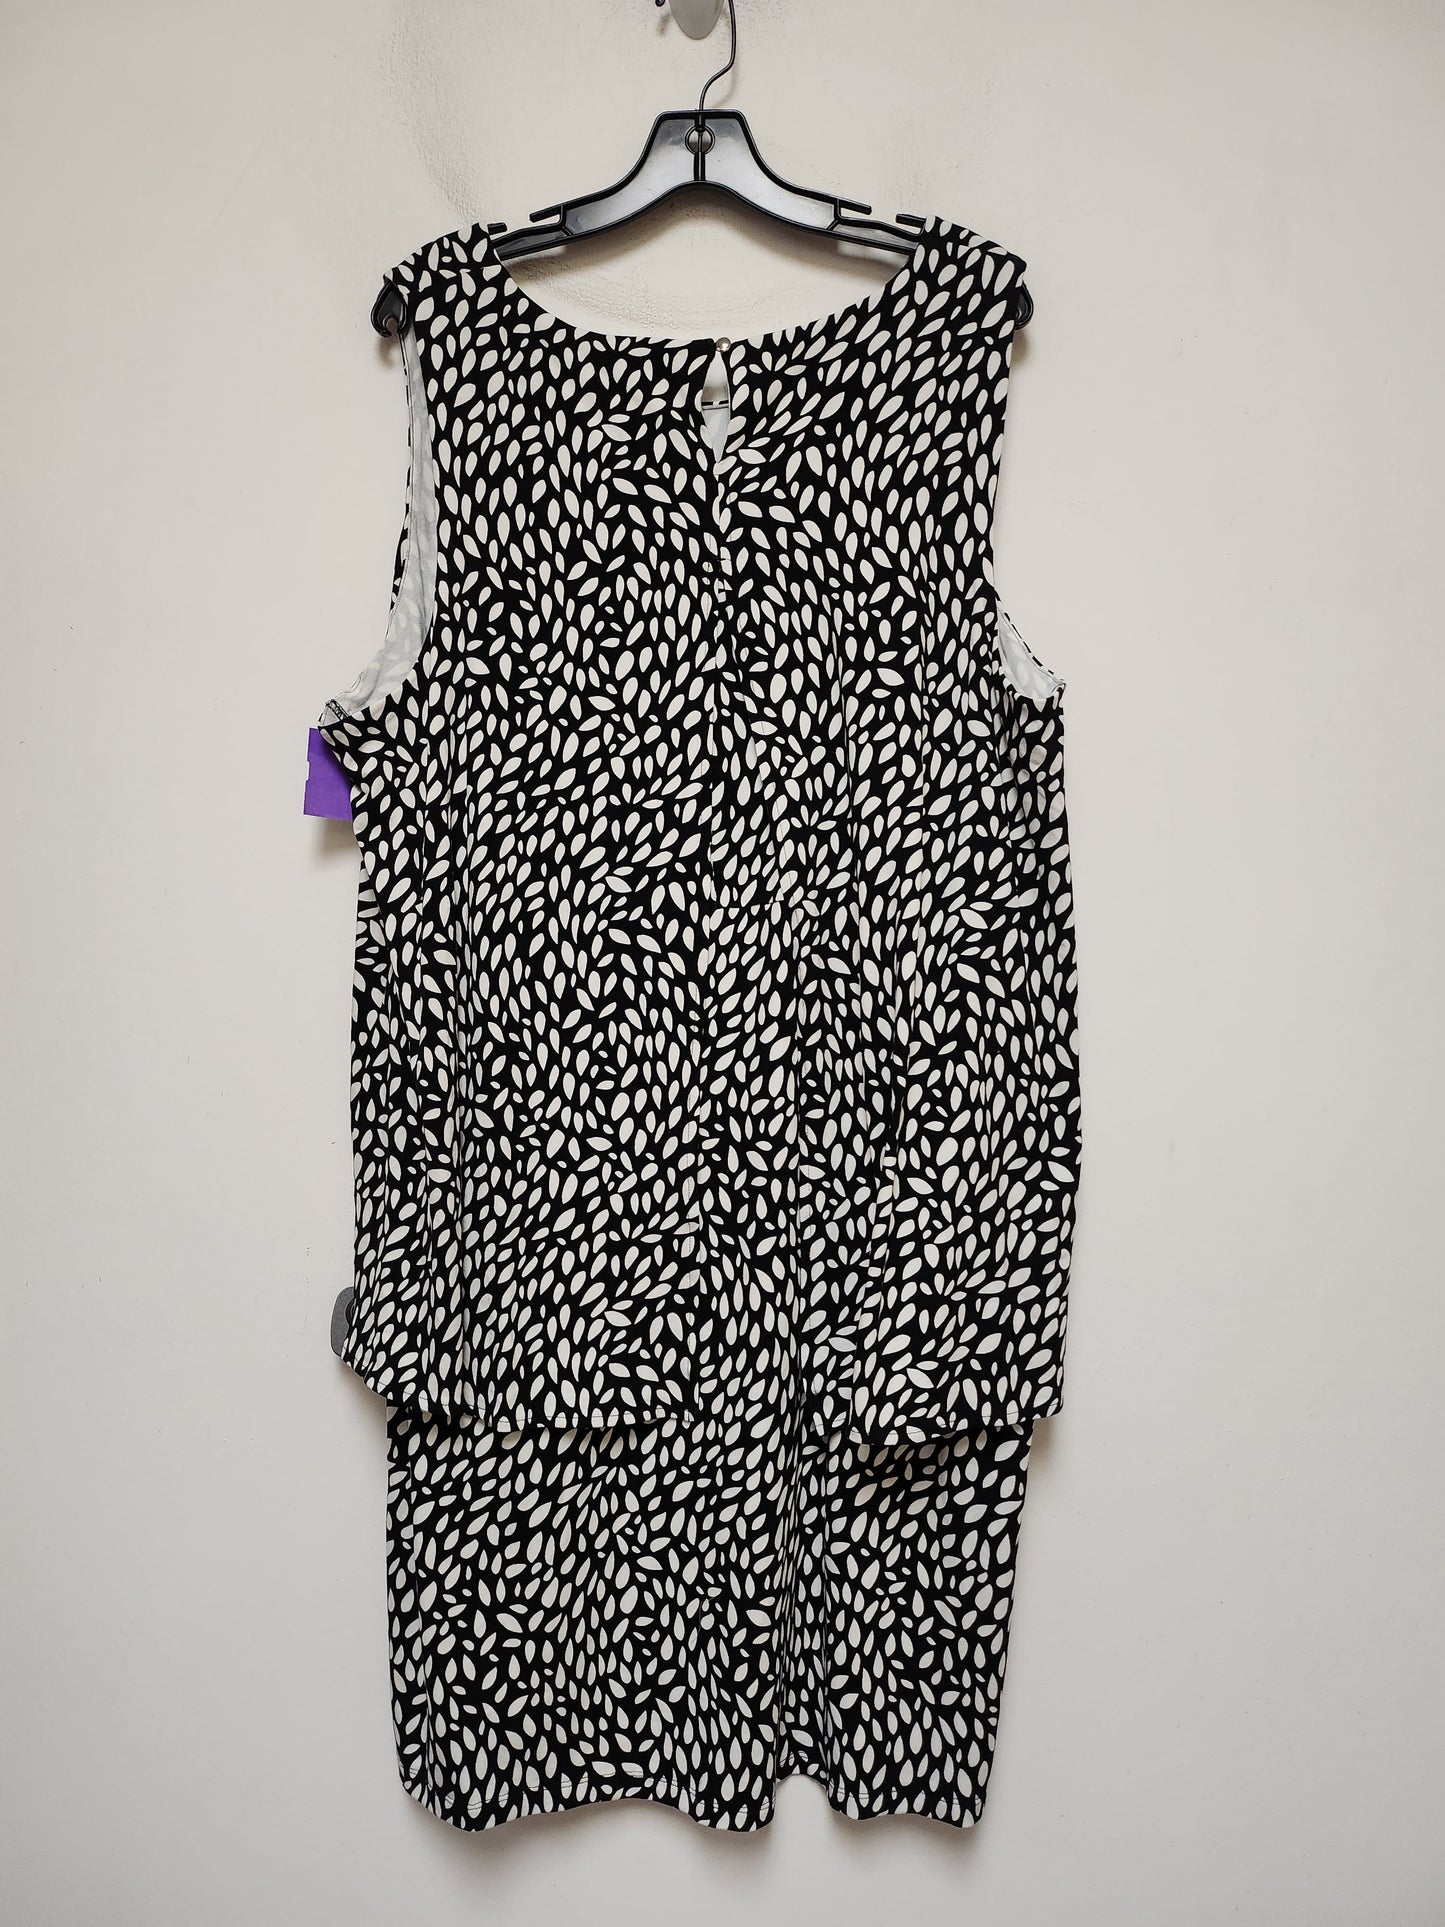 Black & White Dress Casual Short Chicos, Size 2x